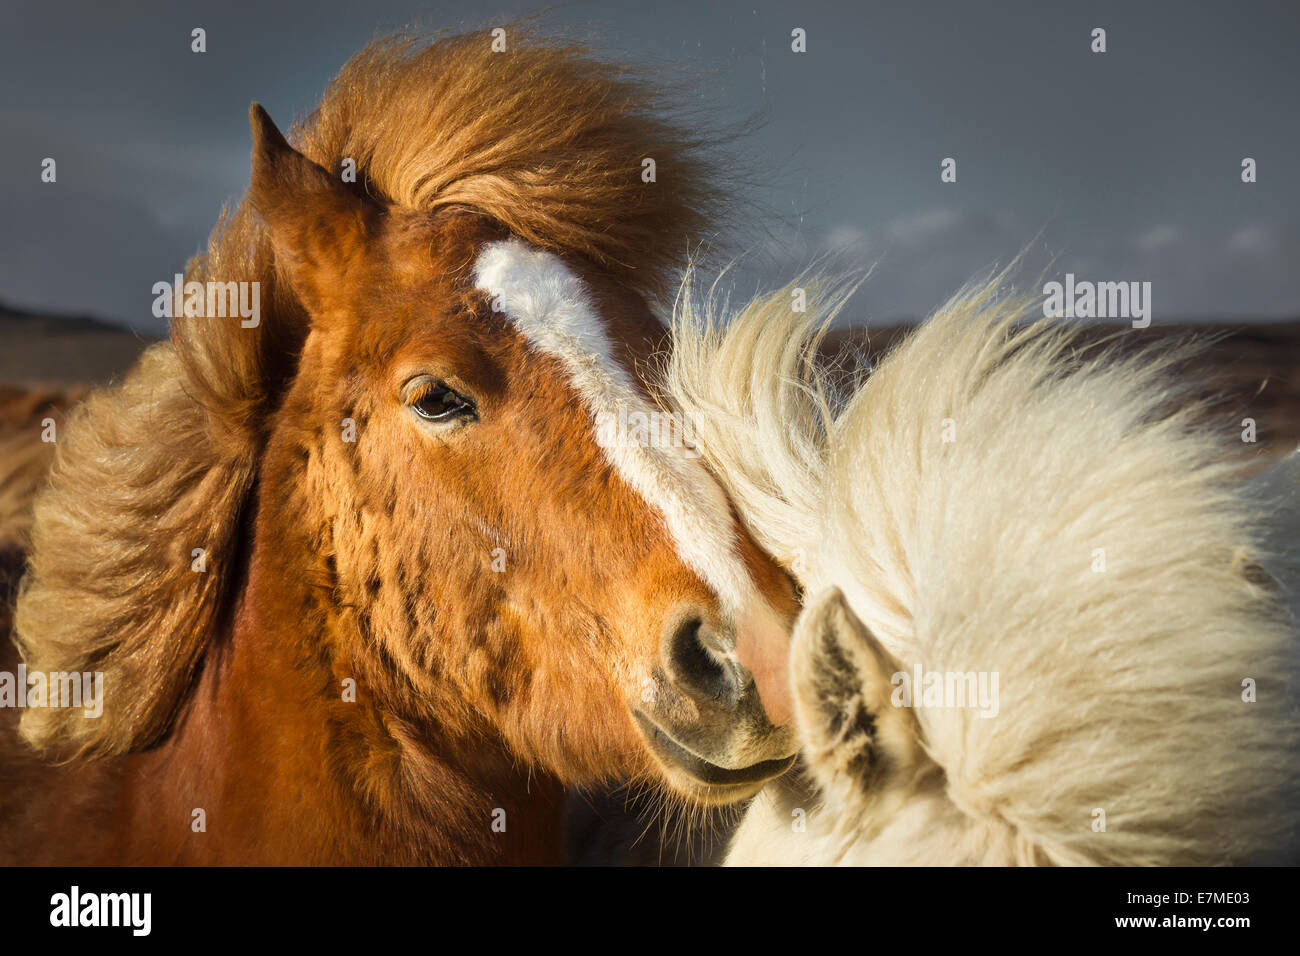 Icelandic horse (Equus ferus caballus) whispering in the ear of another horse on the Vatnsnes peninsula in Iceland. Stock Photo